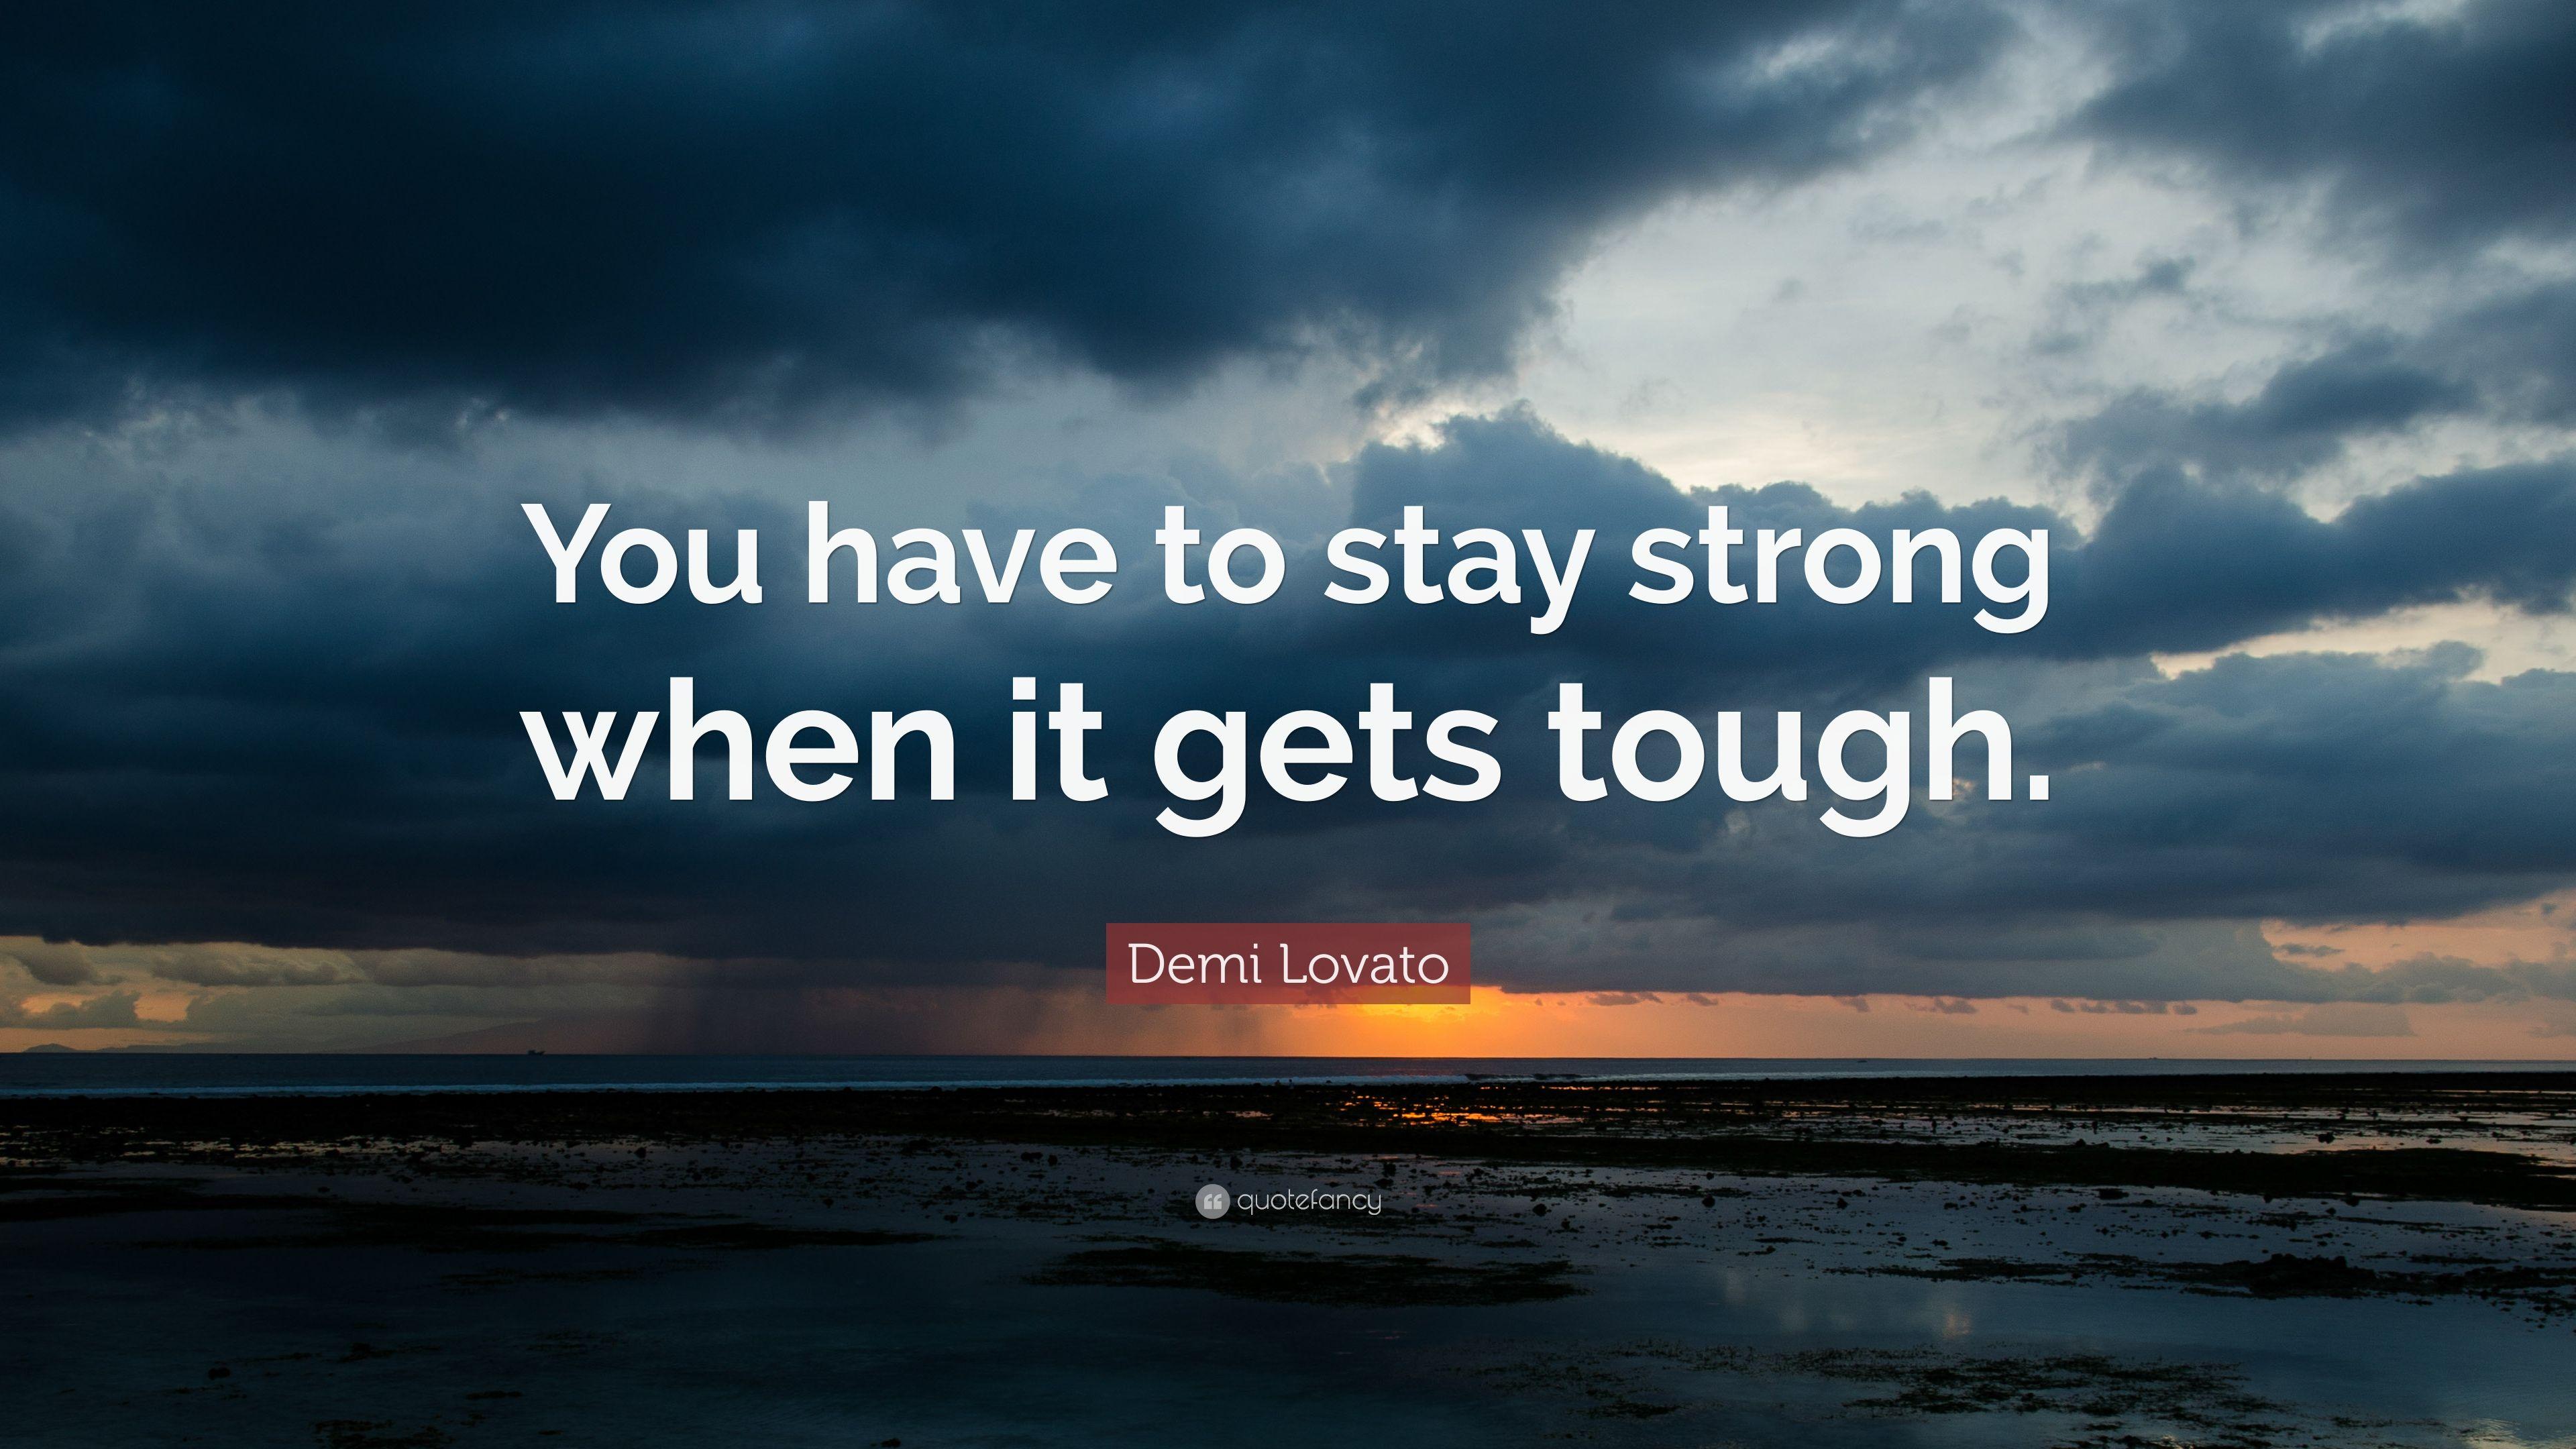 Demi Lovato Quote: “You have to stay strong when it gets tough.” (18 wallpaper)